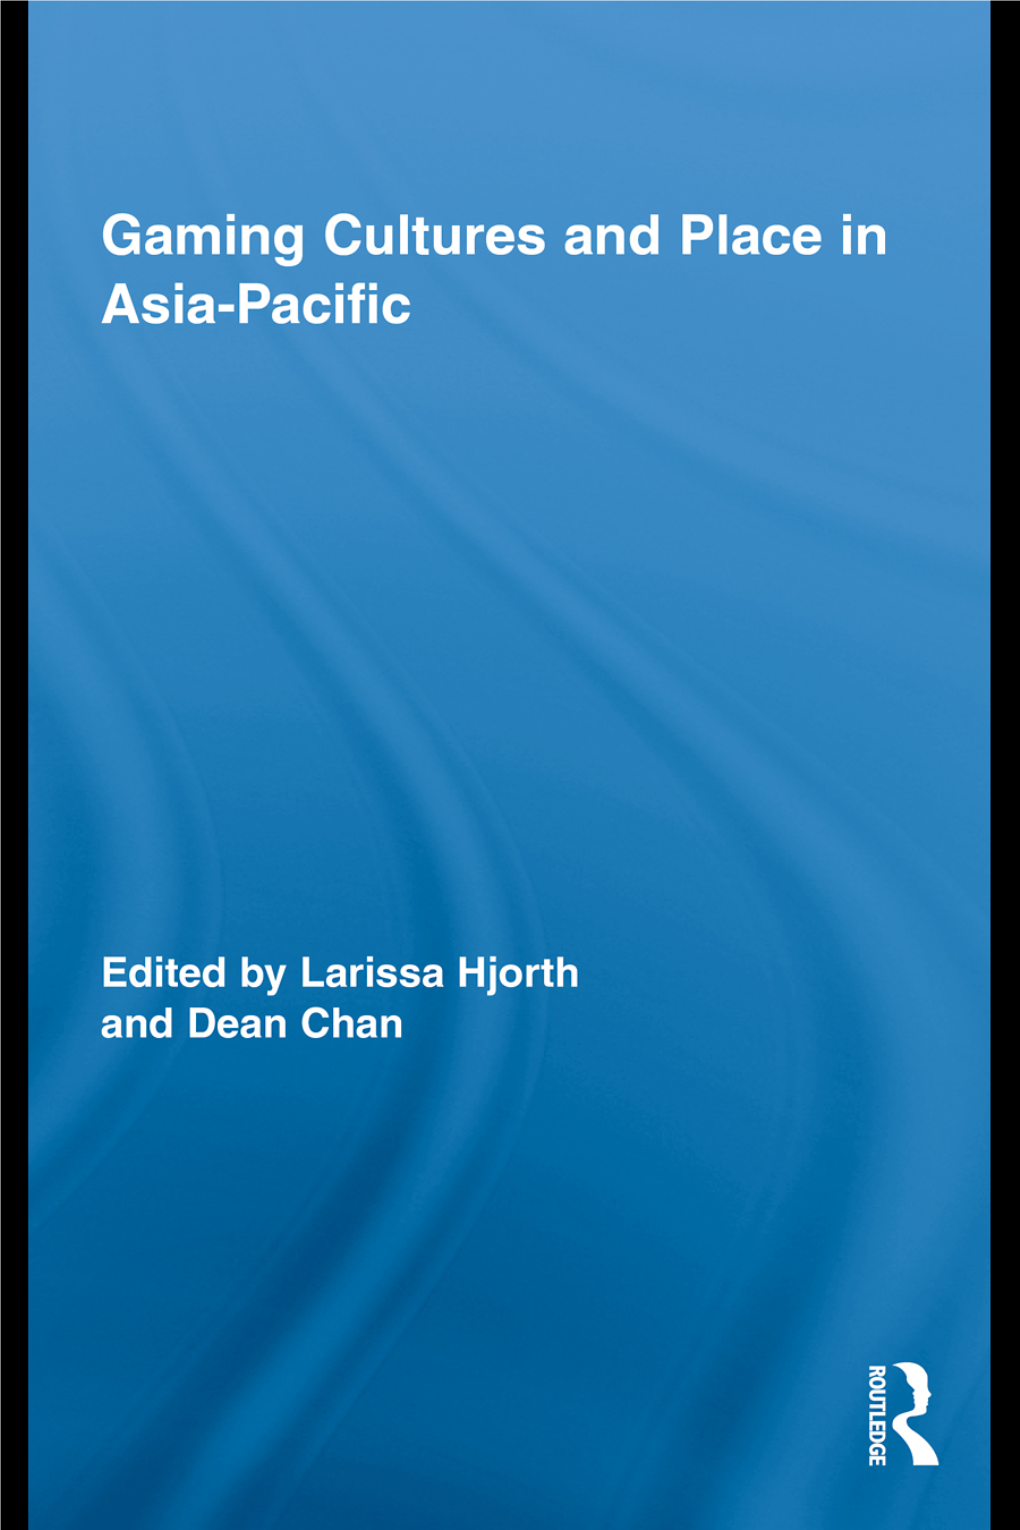 Gaming Cultures and Place in Asia-Pacific / Edited by Larissa Hjorth and Dean Chan